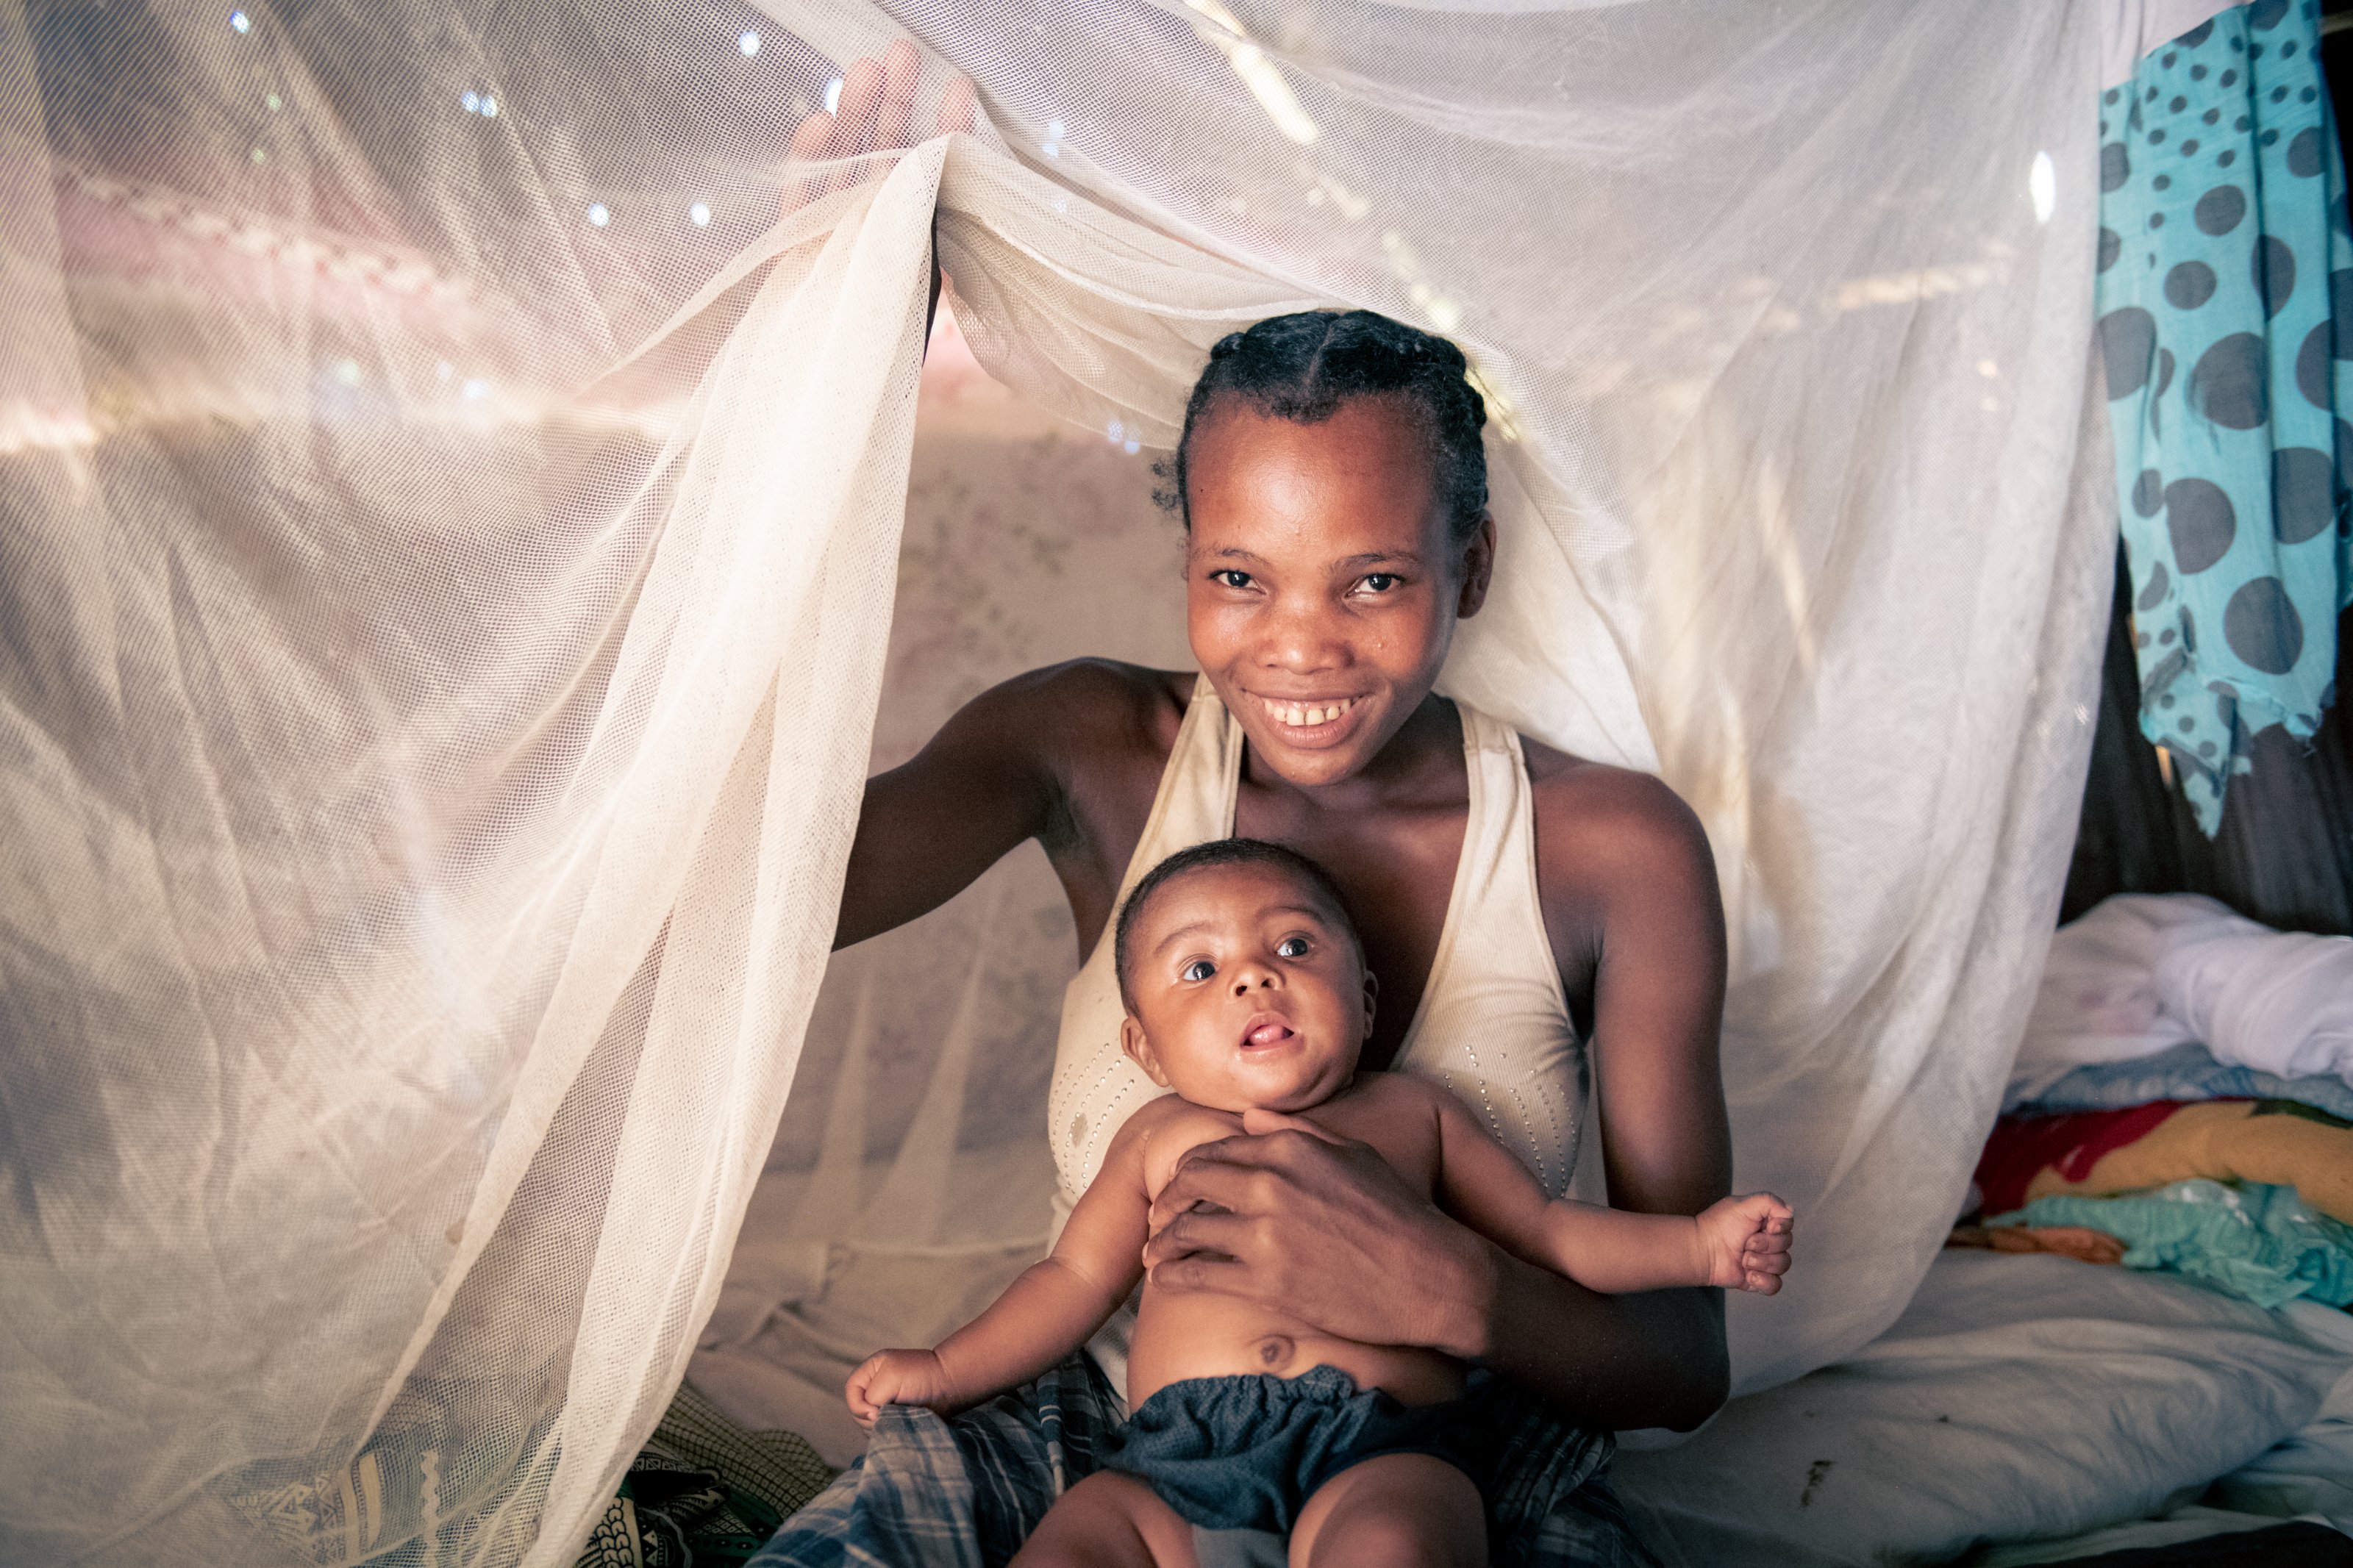 U.S. President's Malaria Initiative (PMI) on X: W/ support from @PMIgov,  Madagascar is fighting to #EndMalaria—the disease most commonly seen at  health centers in the country—w/ a campaign that will treat 165K+